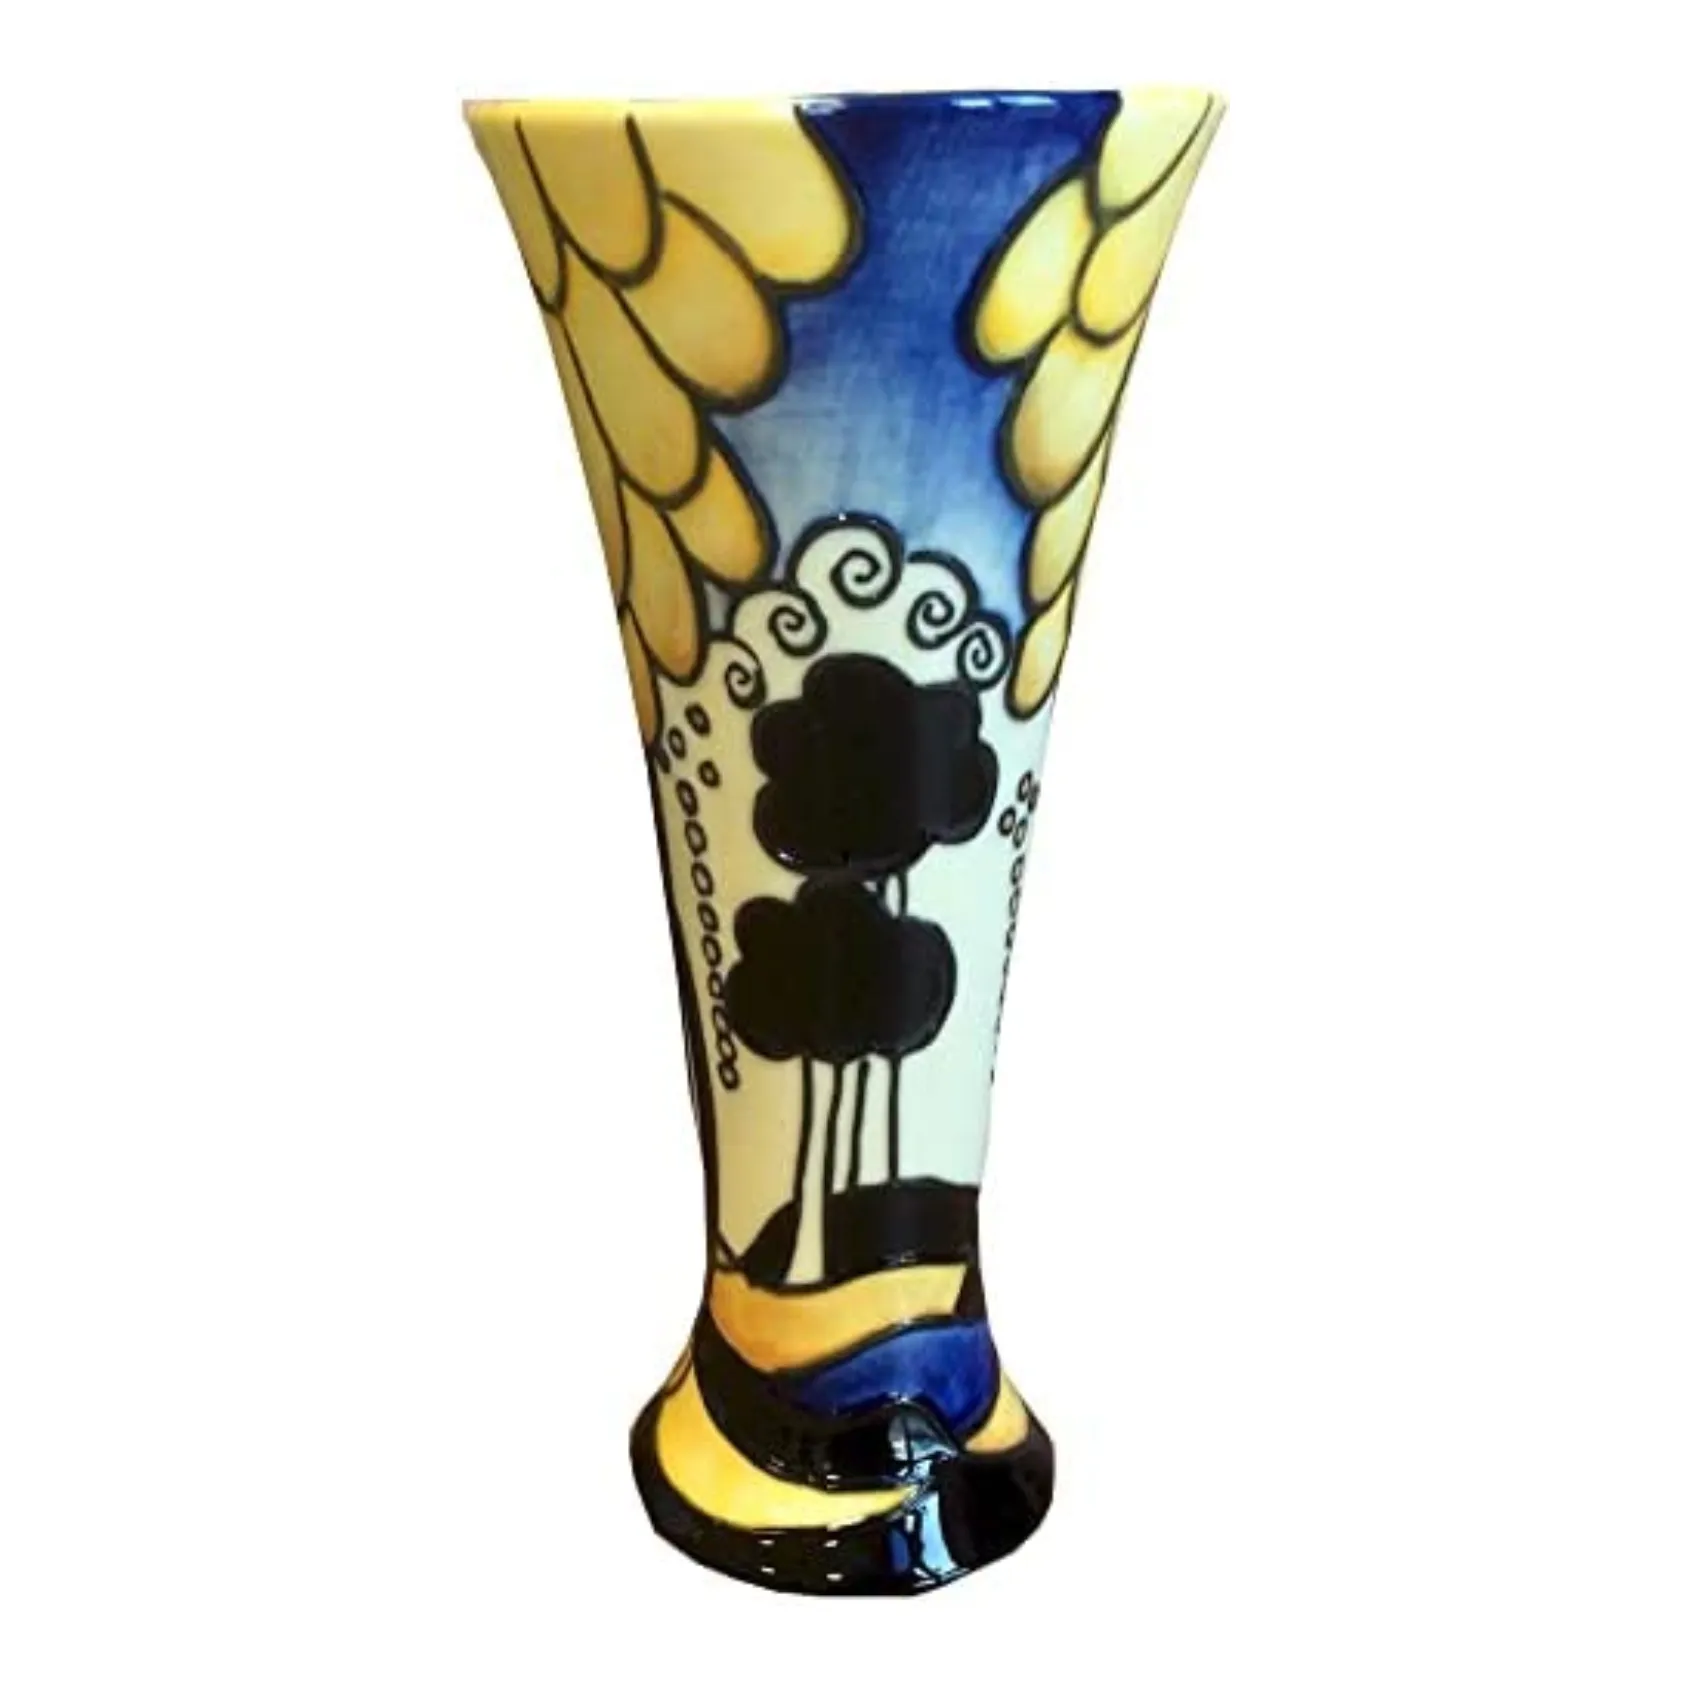 slim tall vase with yellow black trees on white background blue sky art deco style